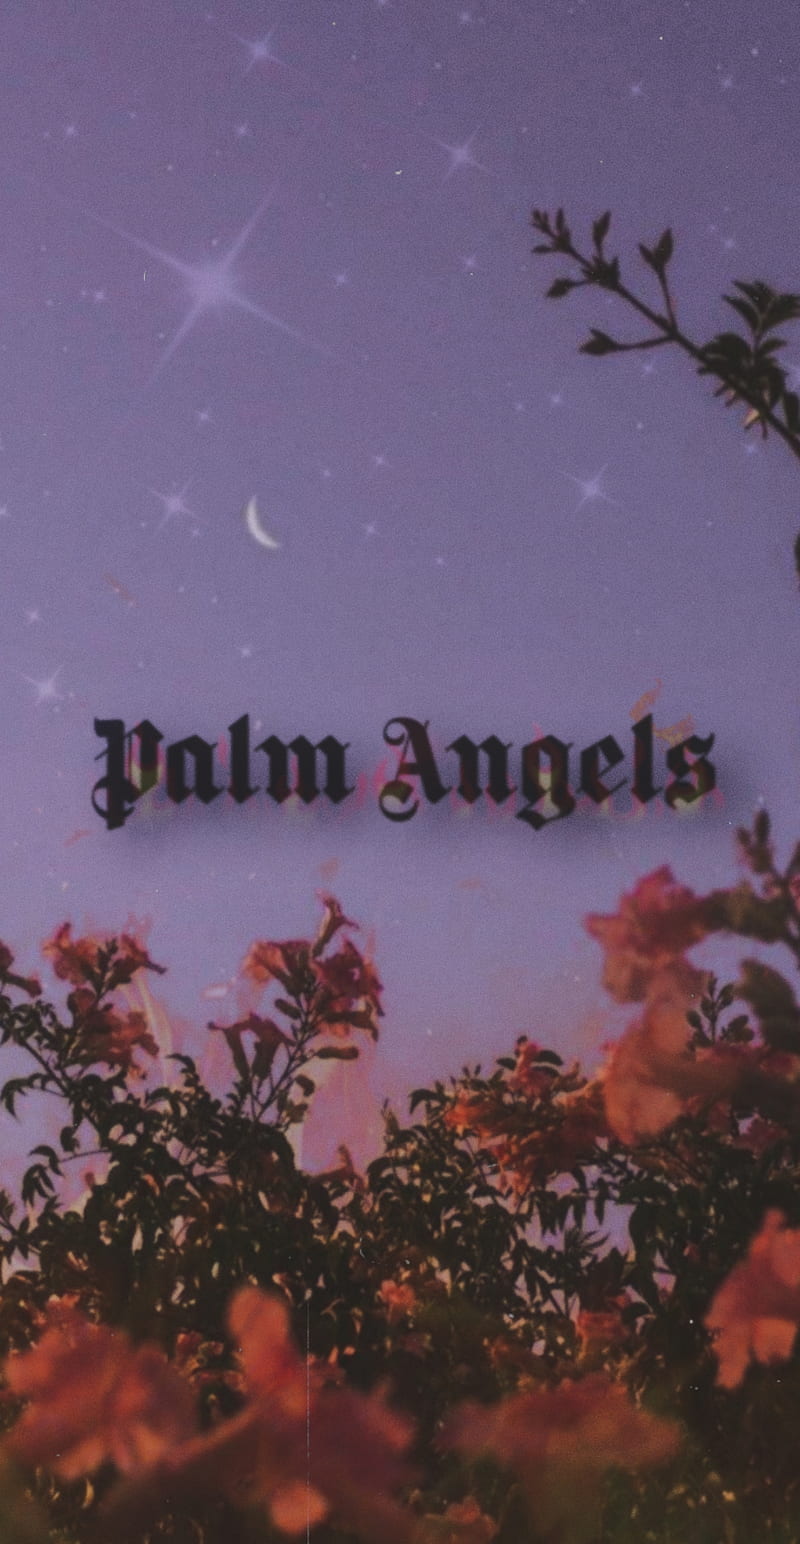 Palm Angels Wallpaper Discover more Angels Vlone Angels Vlone Logo Palm  Angels Palm Angels Logo Vlone wallpape  Angel wallpaper V lone  wallpapers Vlone logo